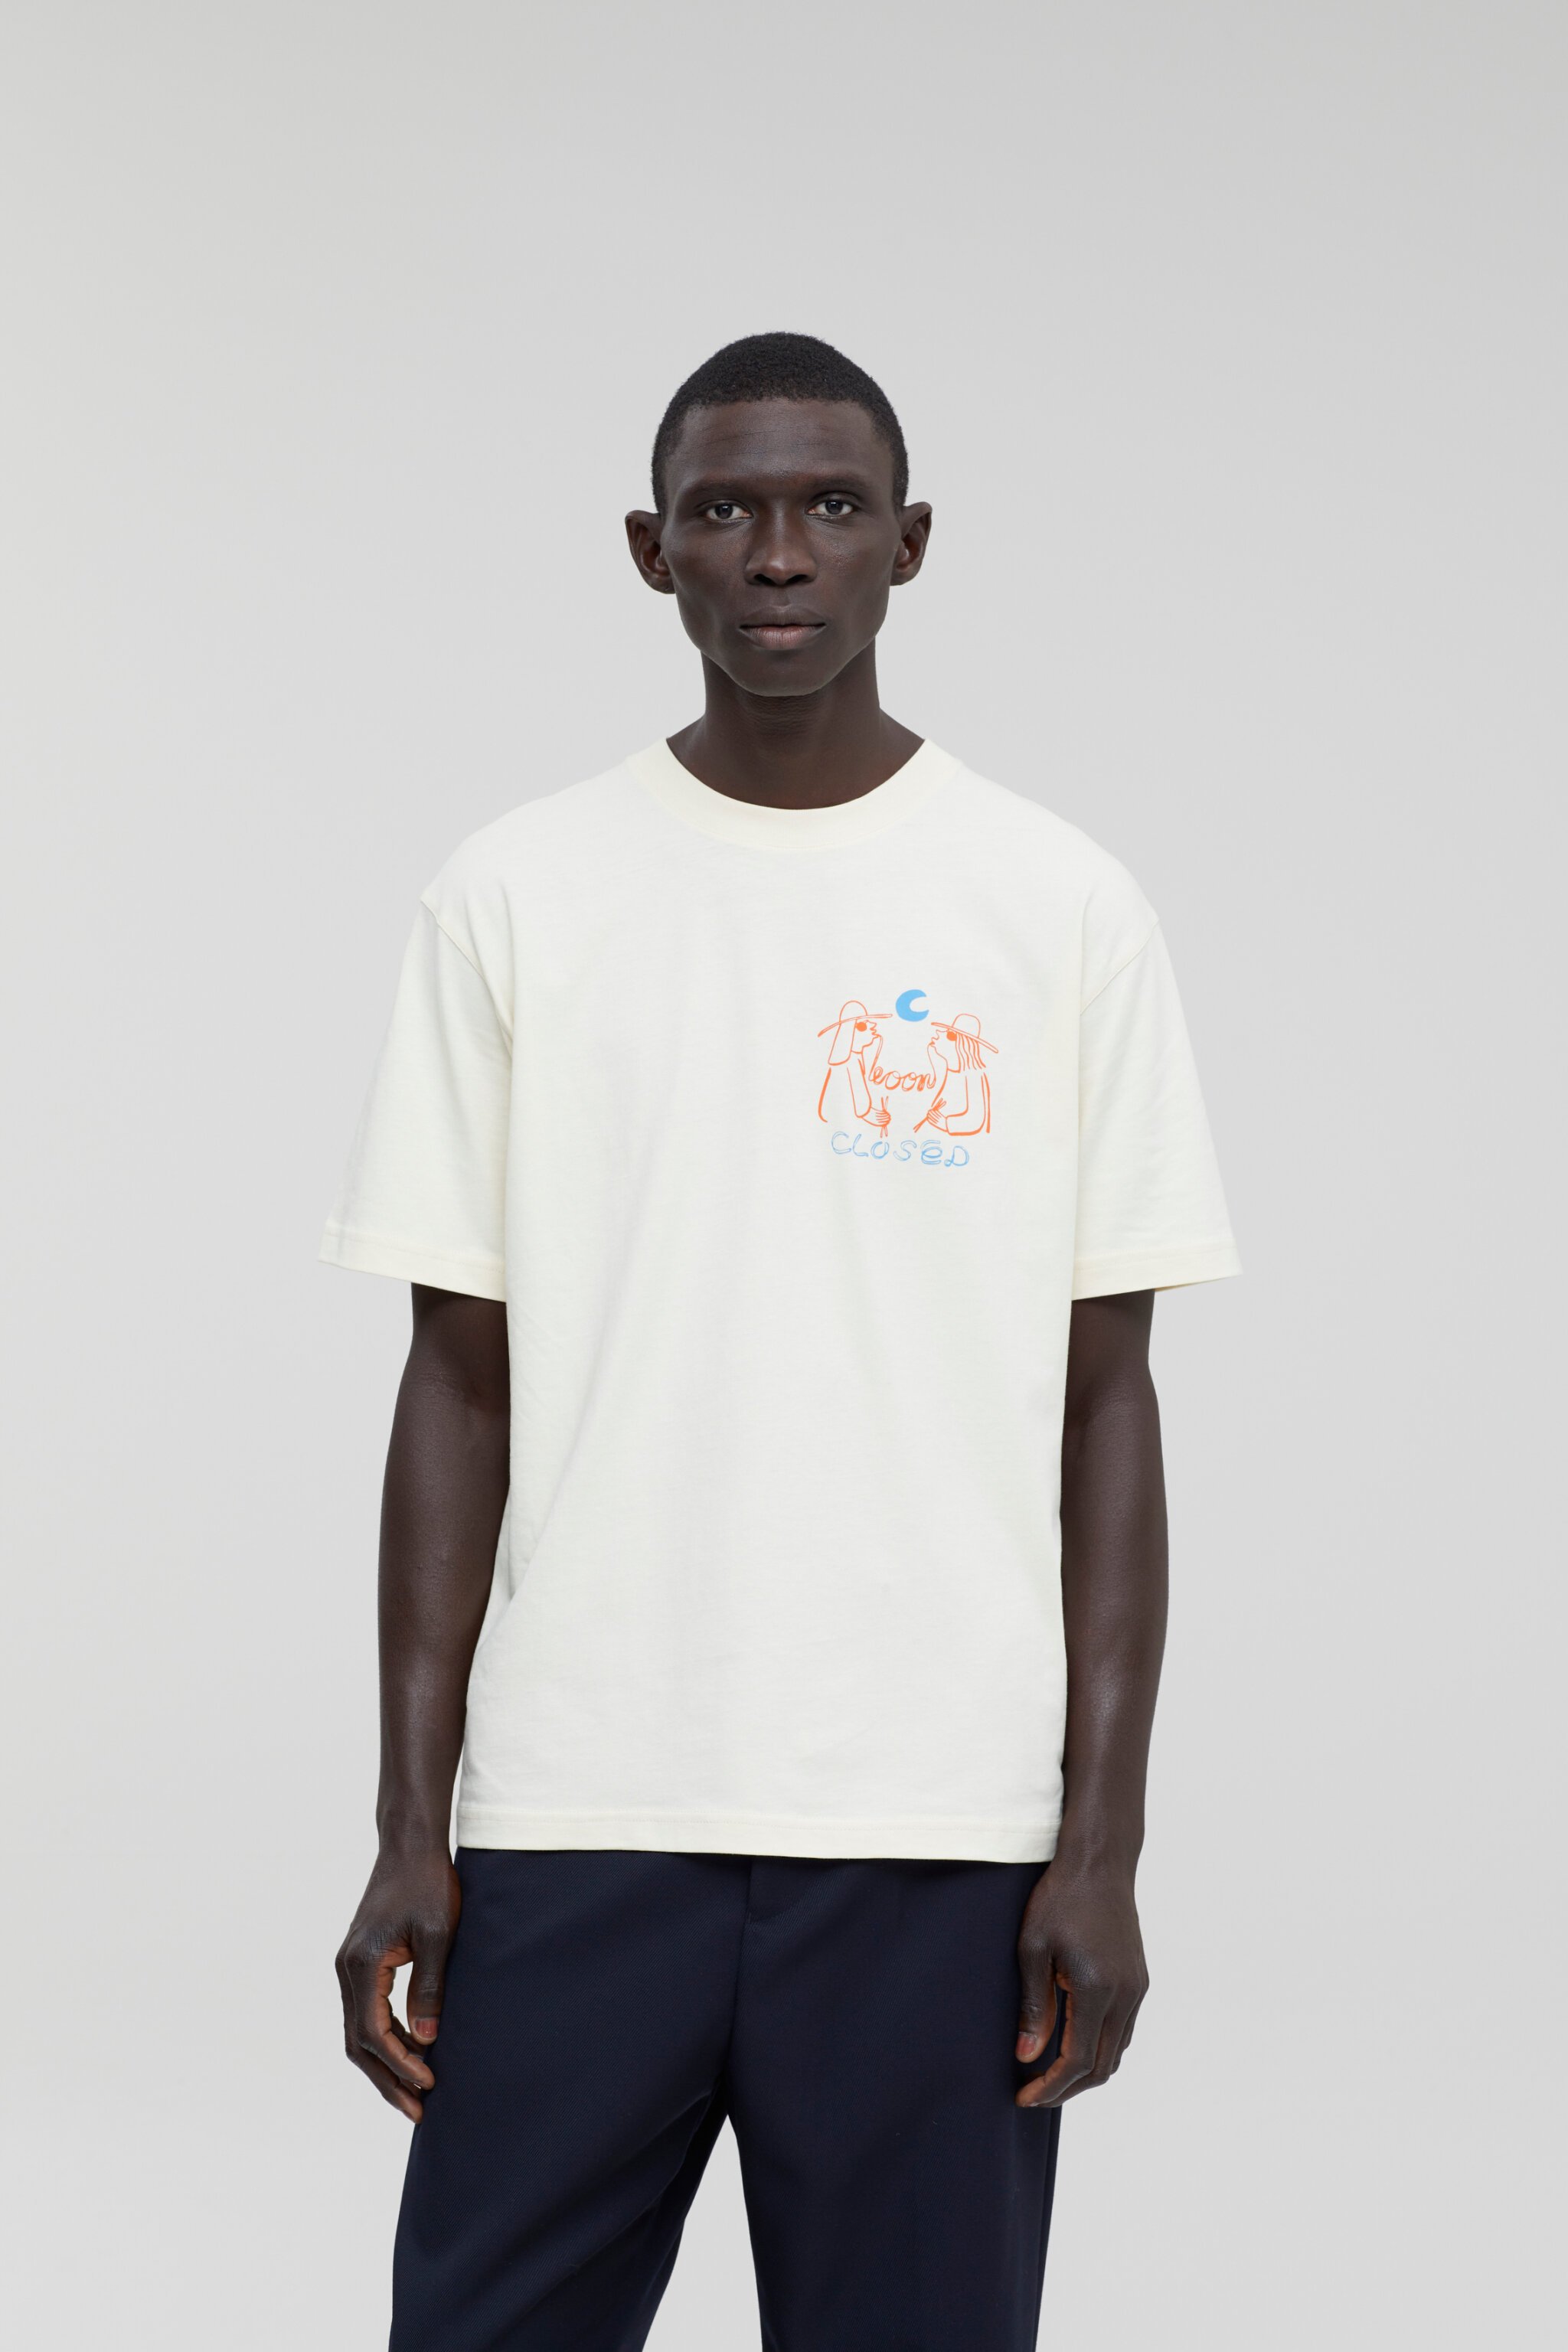 Person wearing an off-white t-shirt